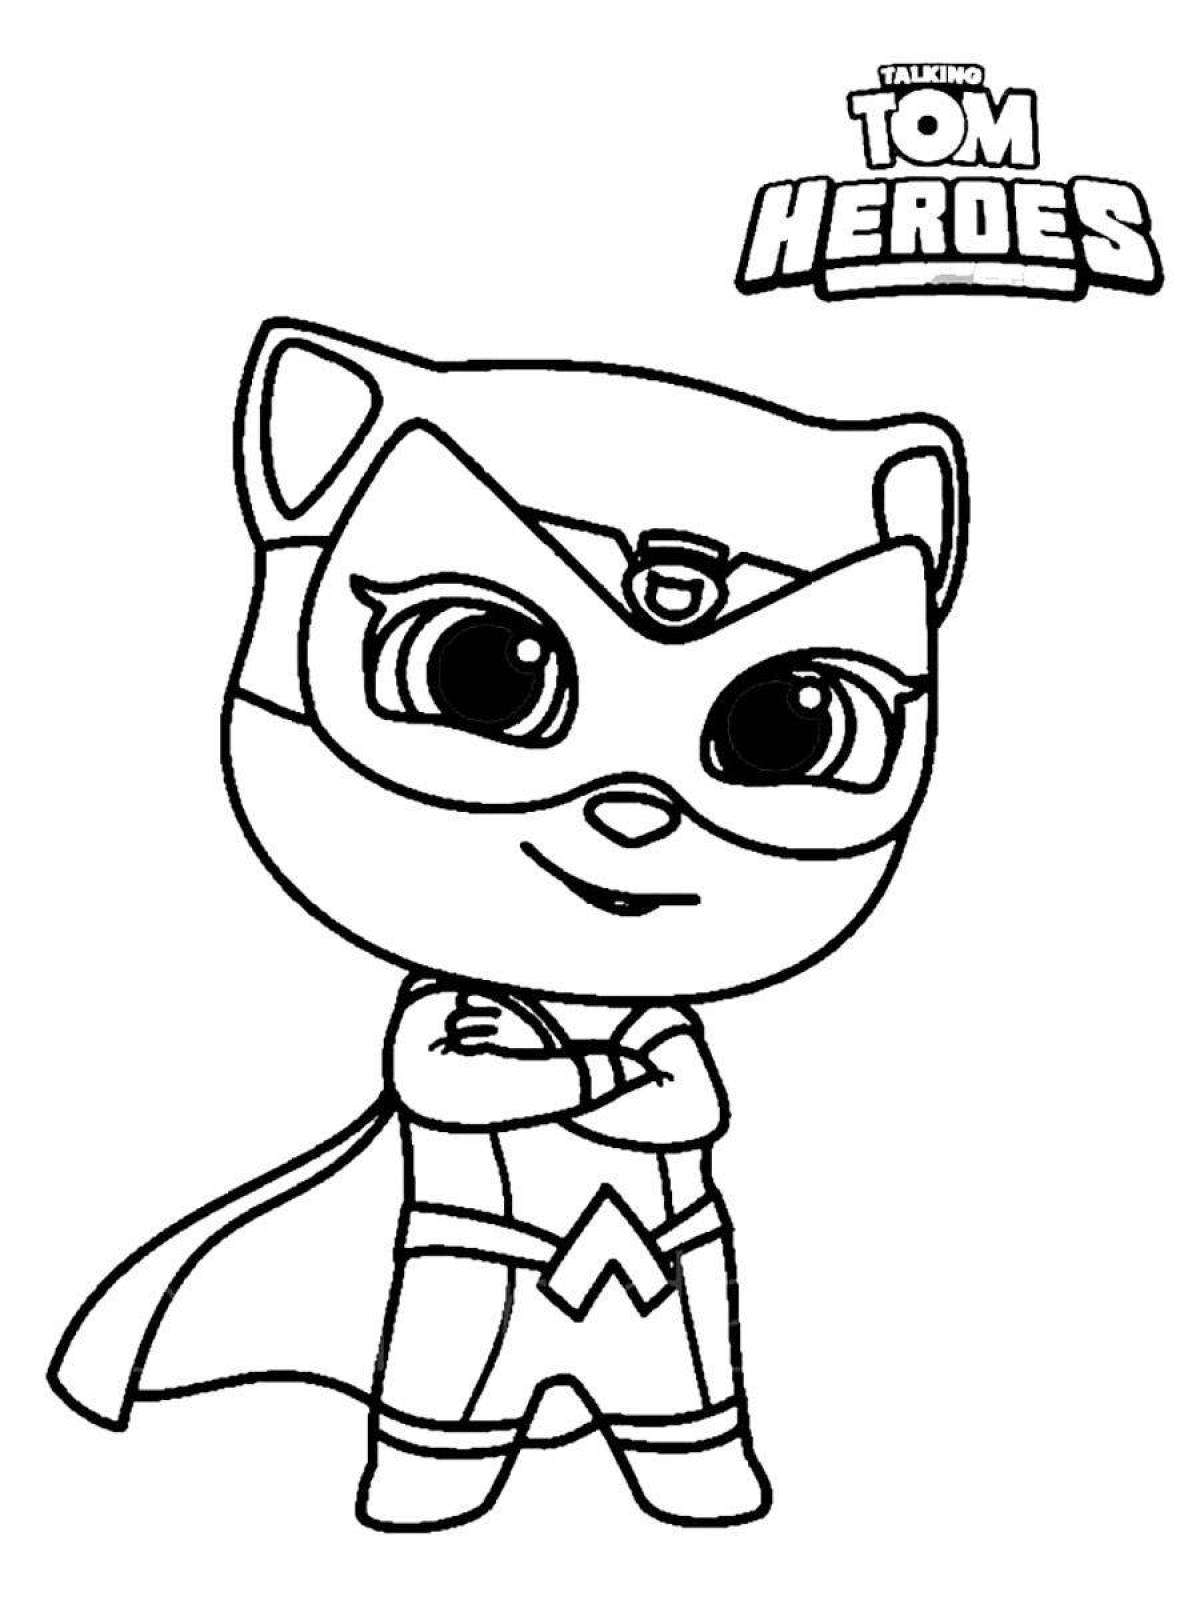 Tom Chase Amazing Heroes coloring page